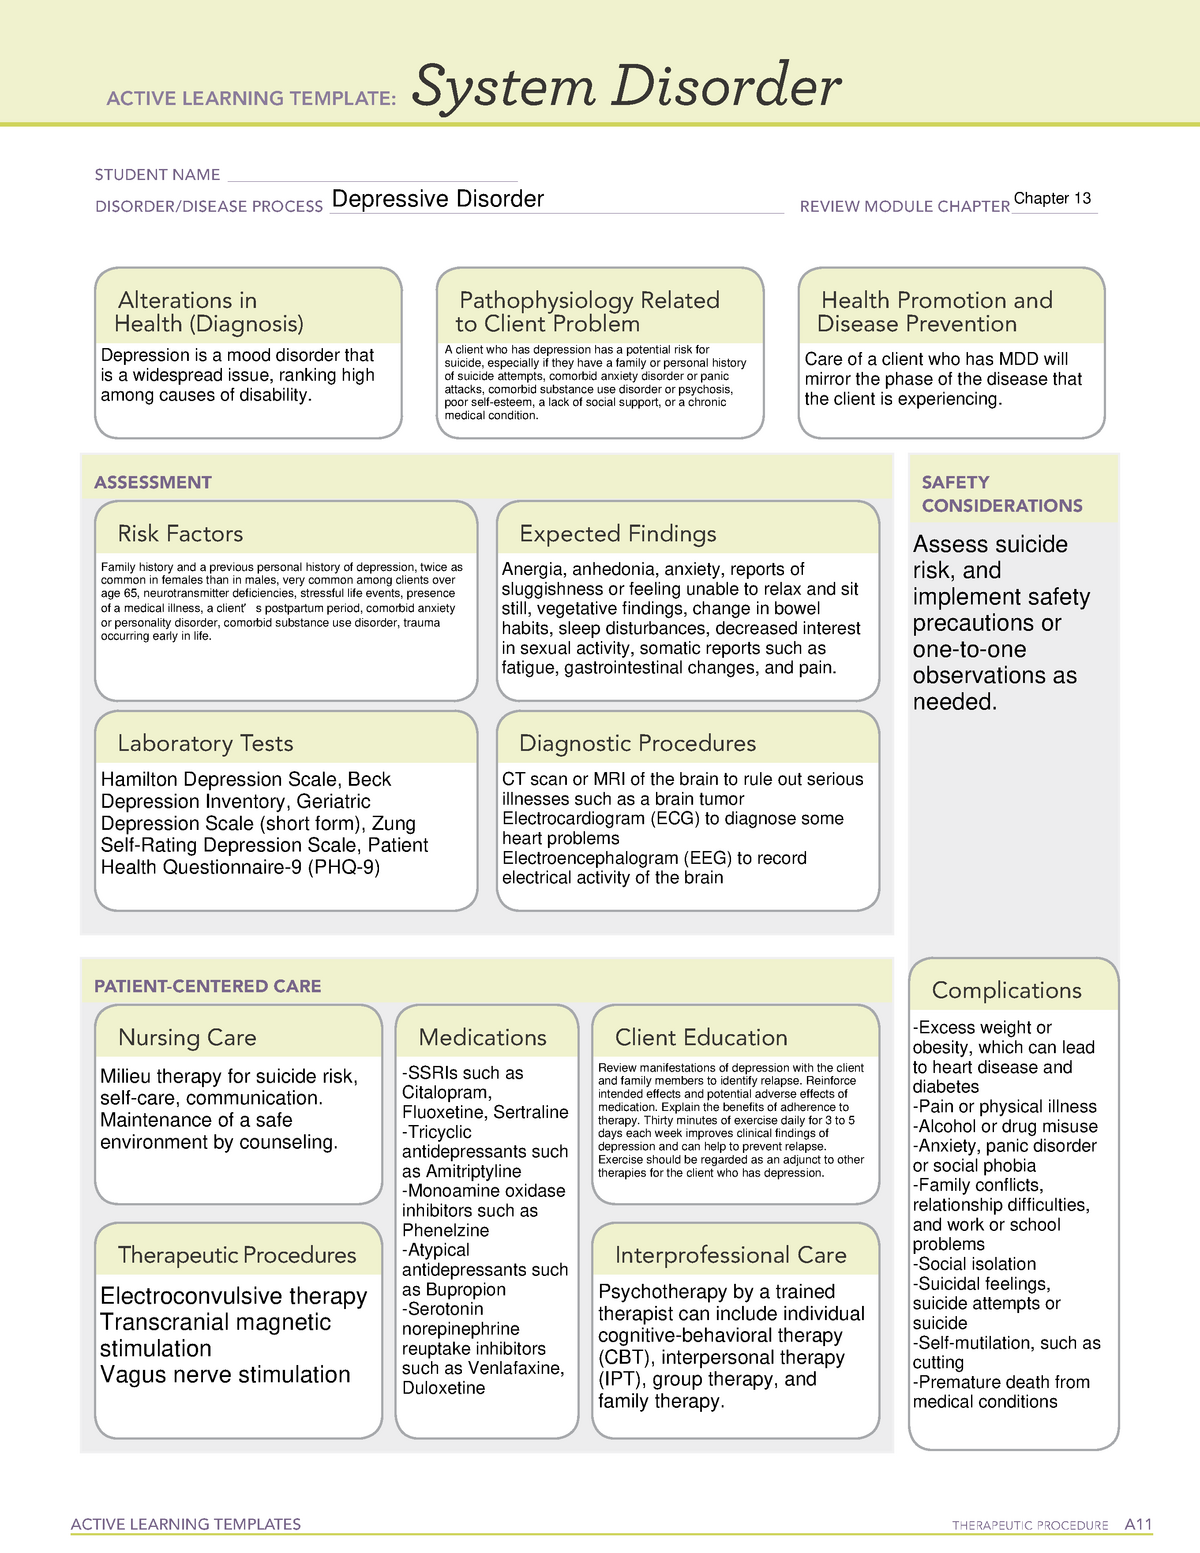 active-learning-template-system-disorder-ch-13-active-learning-templates-therapeutic